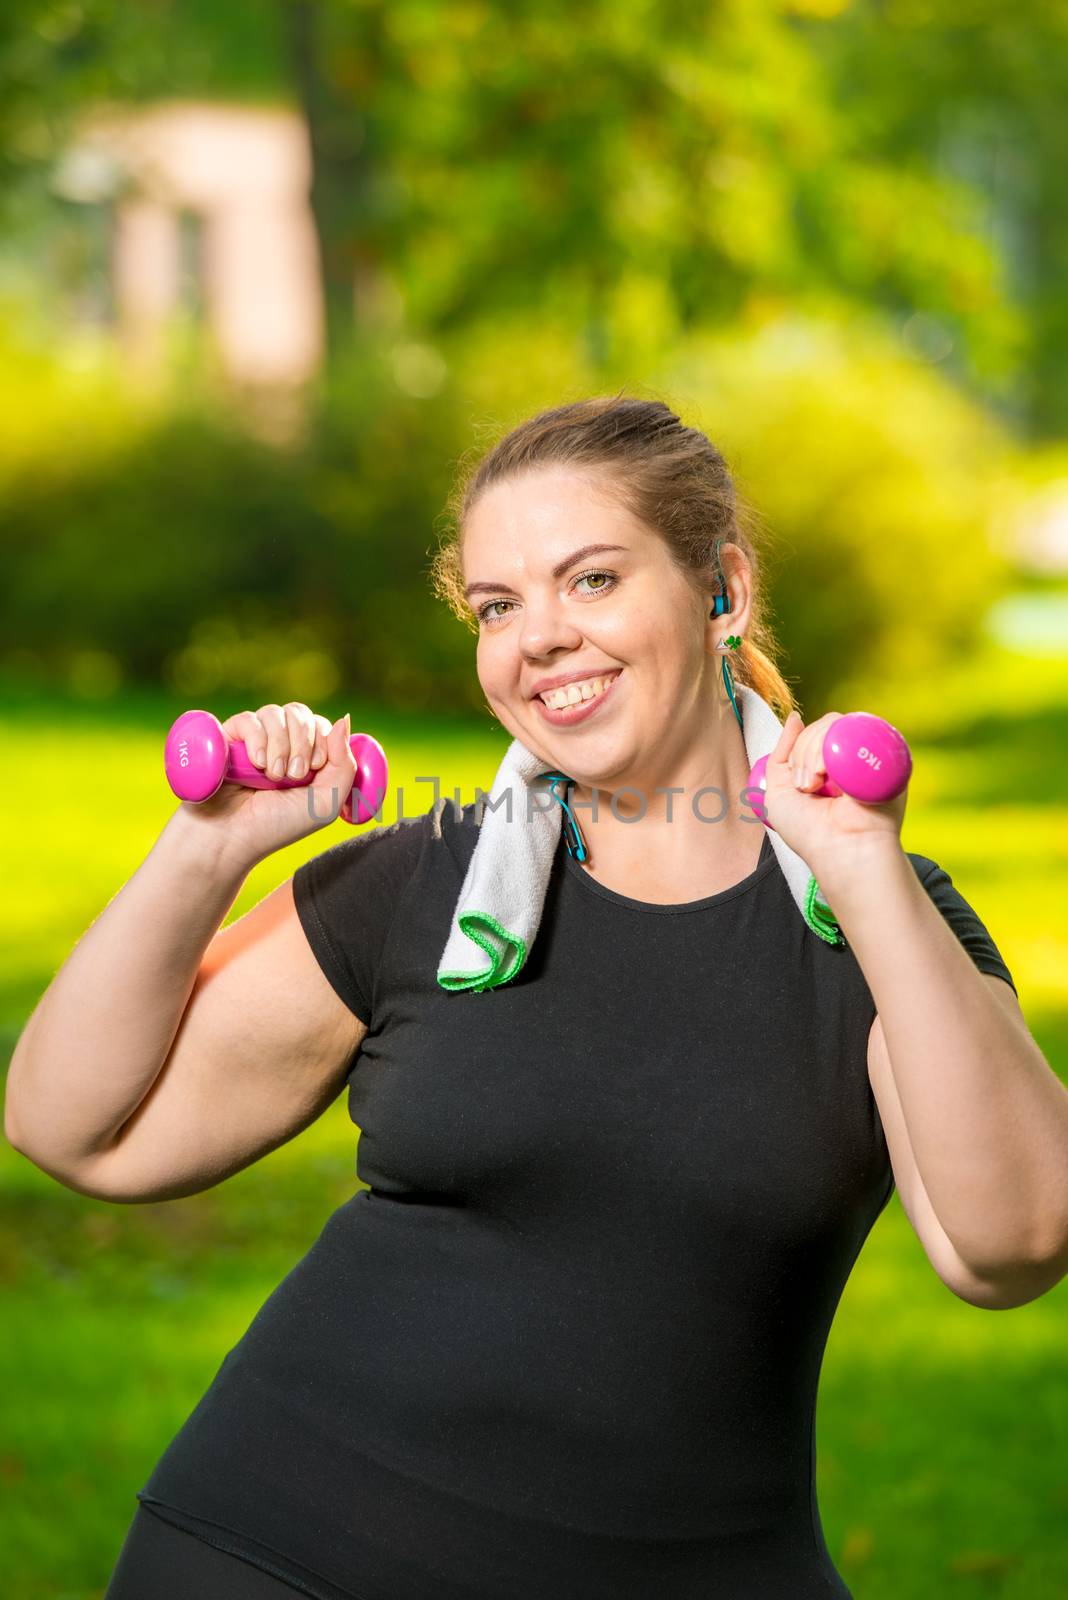 oversize woman in headphones with dumbbells in hand playing sports in park